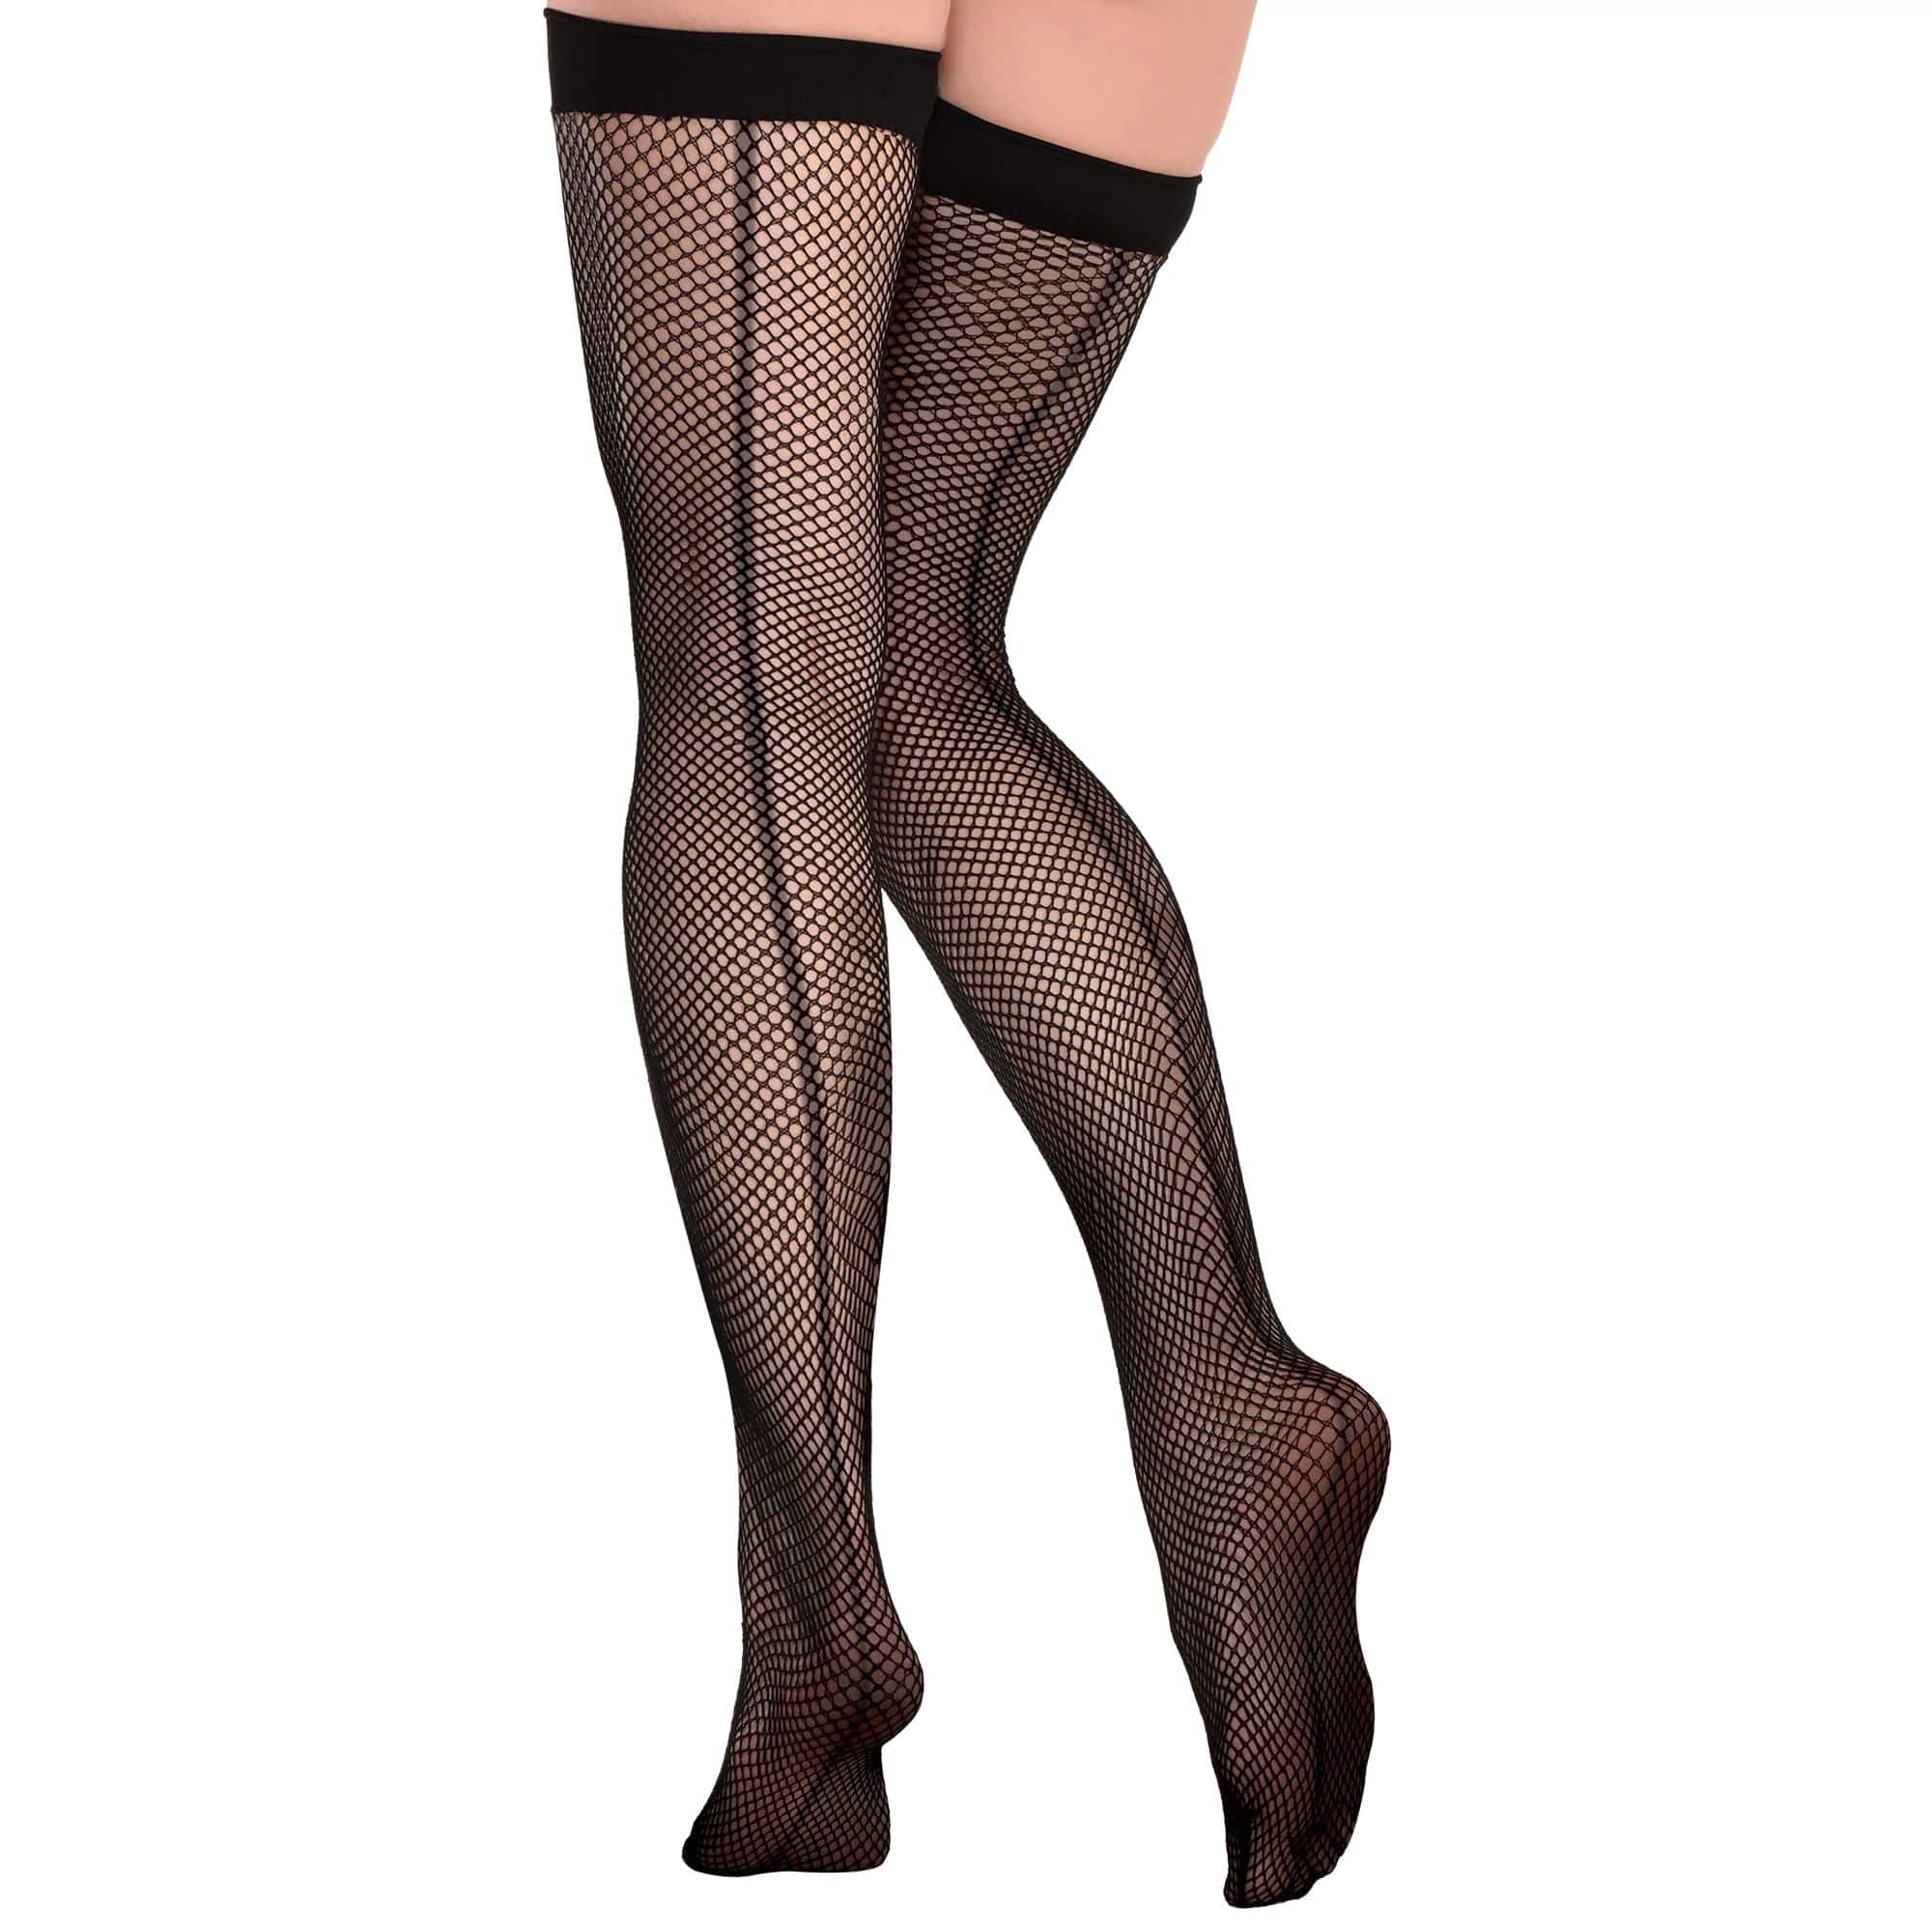 Fishnet Tights – The Costume Store